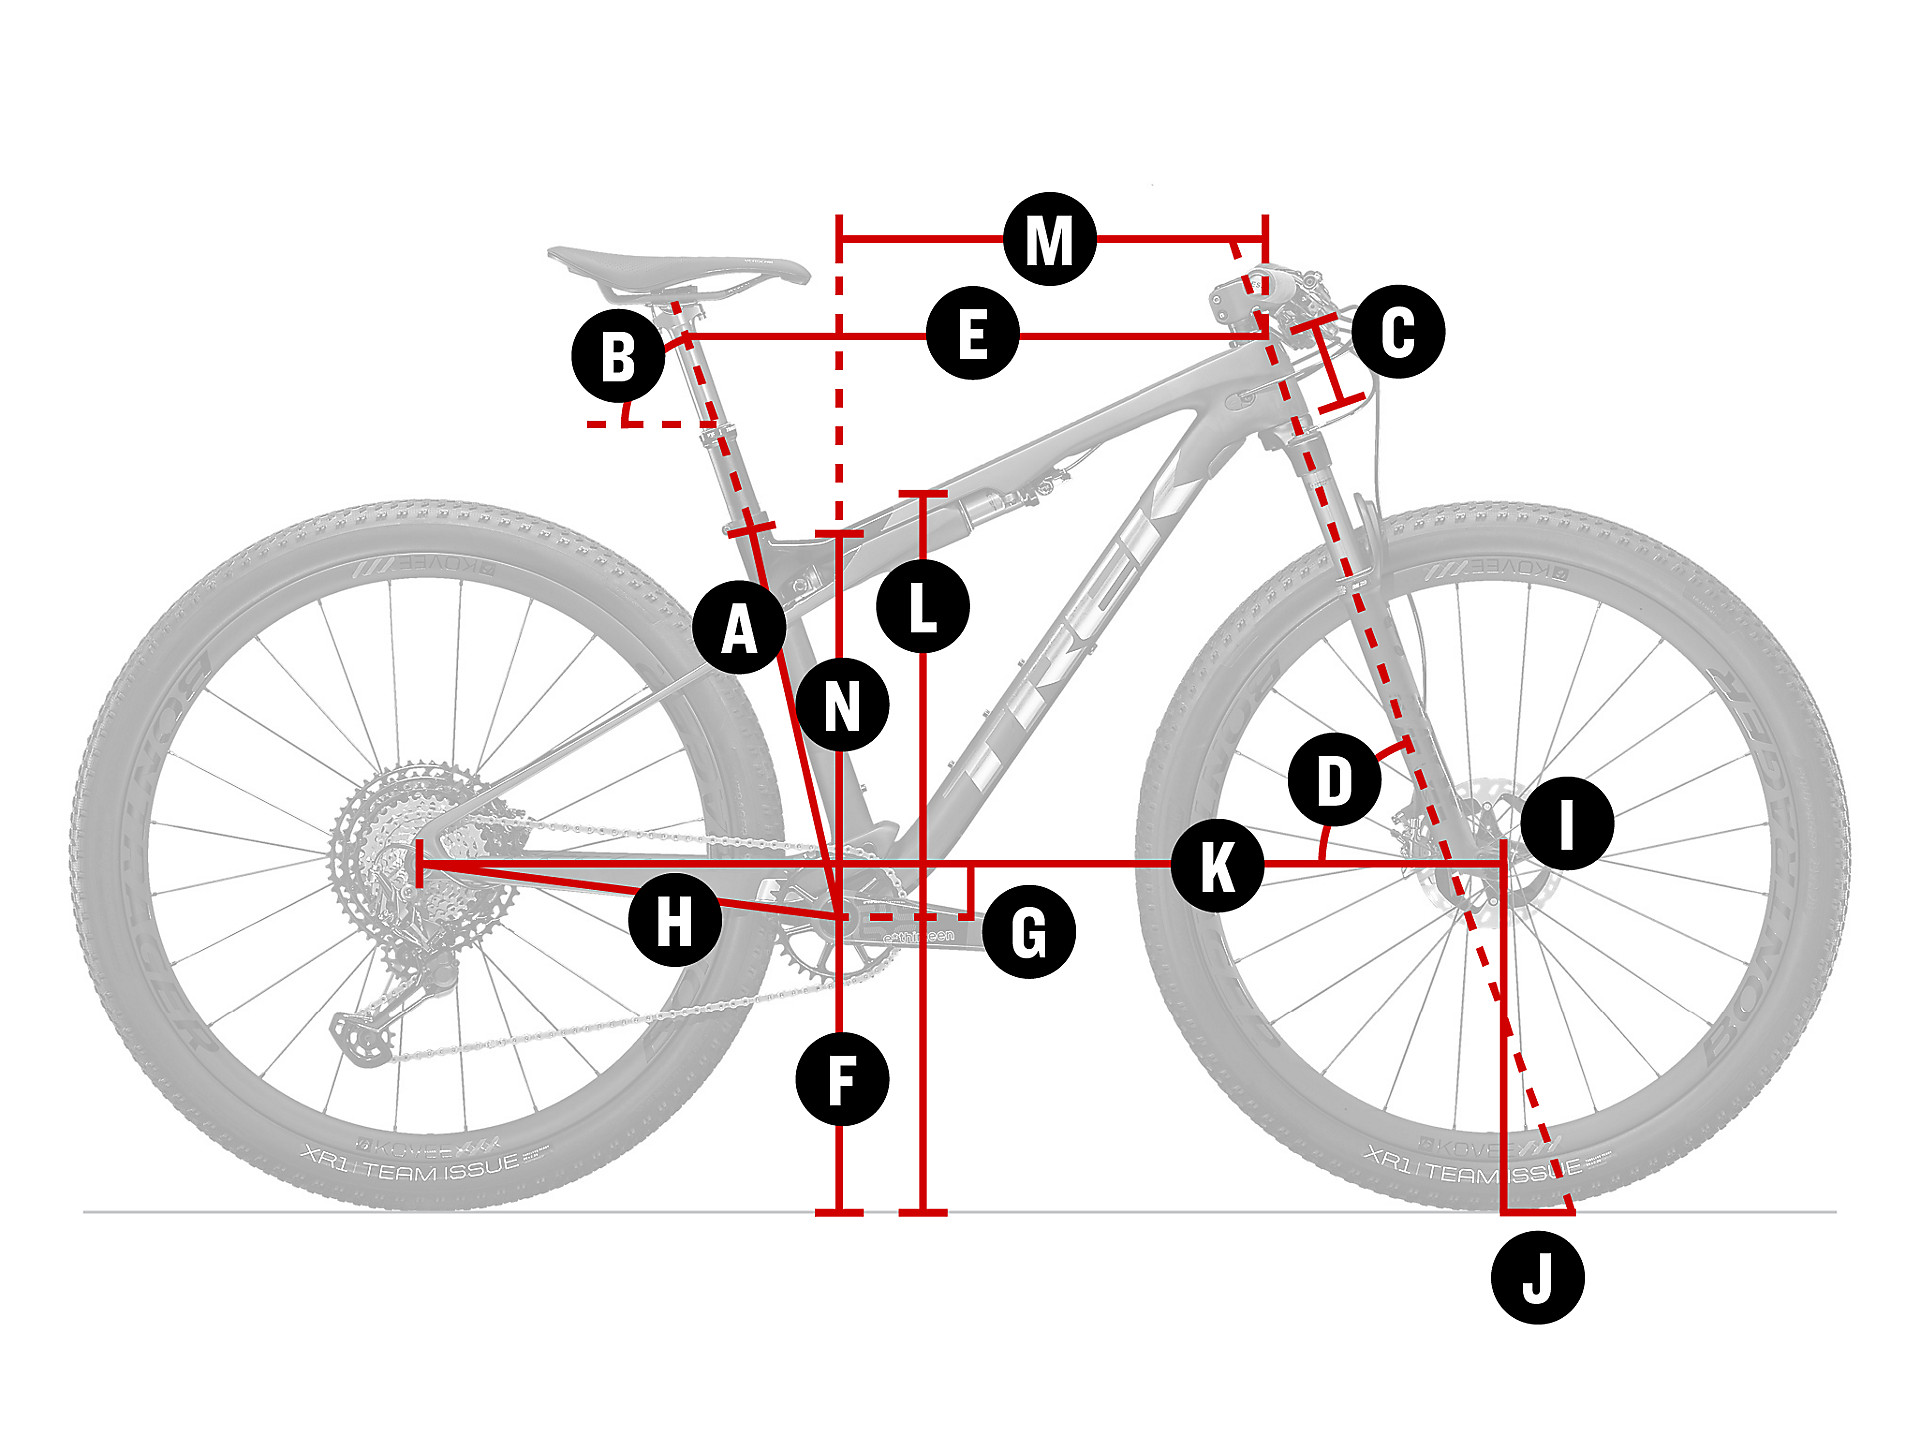 Geometry_Lines_2050x1500_MTB_Supercaliber?$responsive-pjpg$&cache=on,on&wid=1920&hei=1440&fit=fit,1